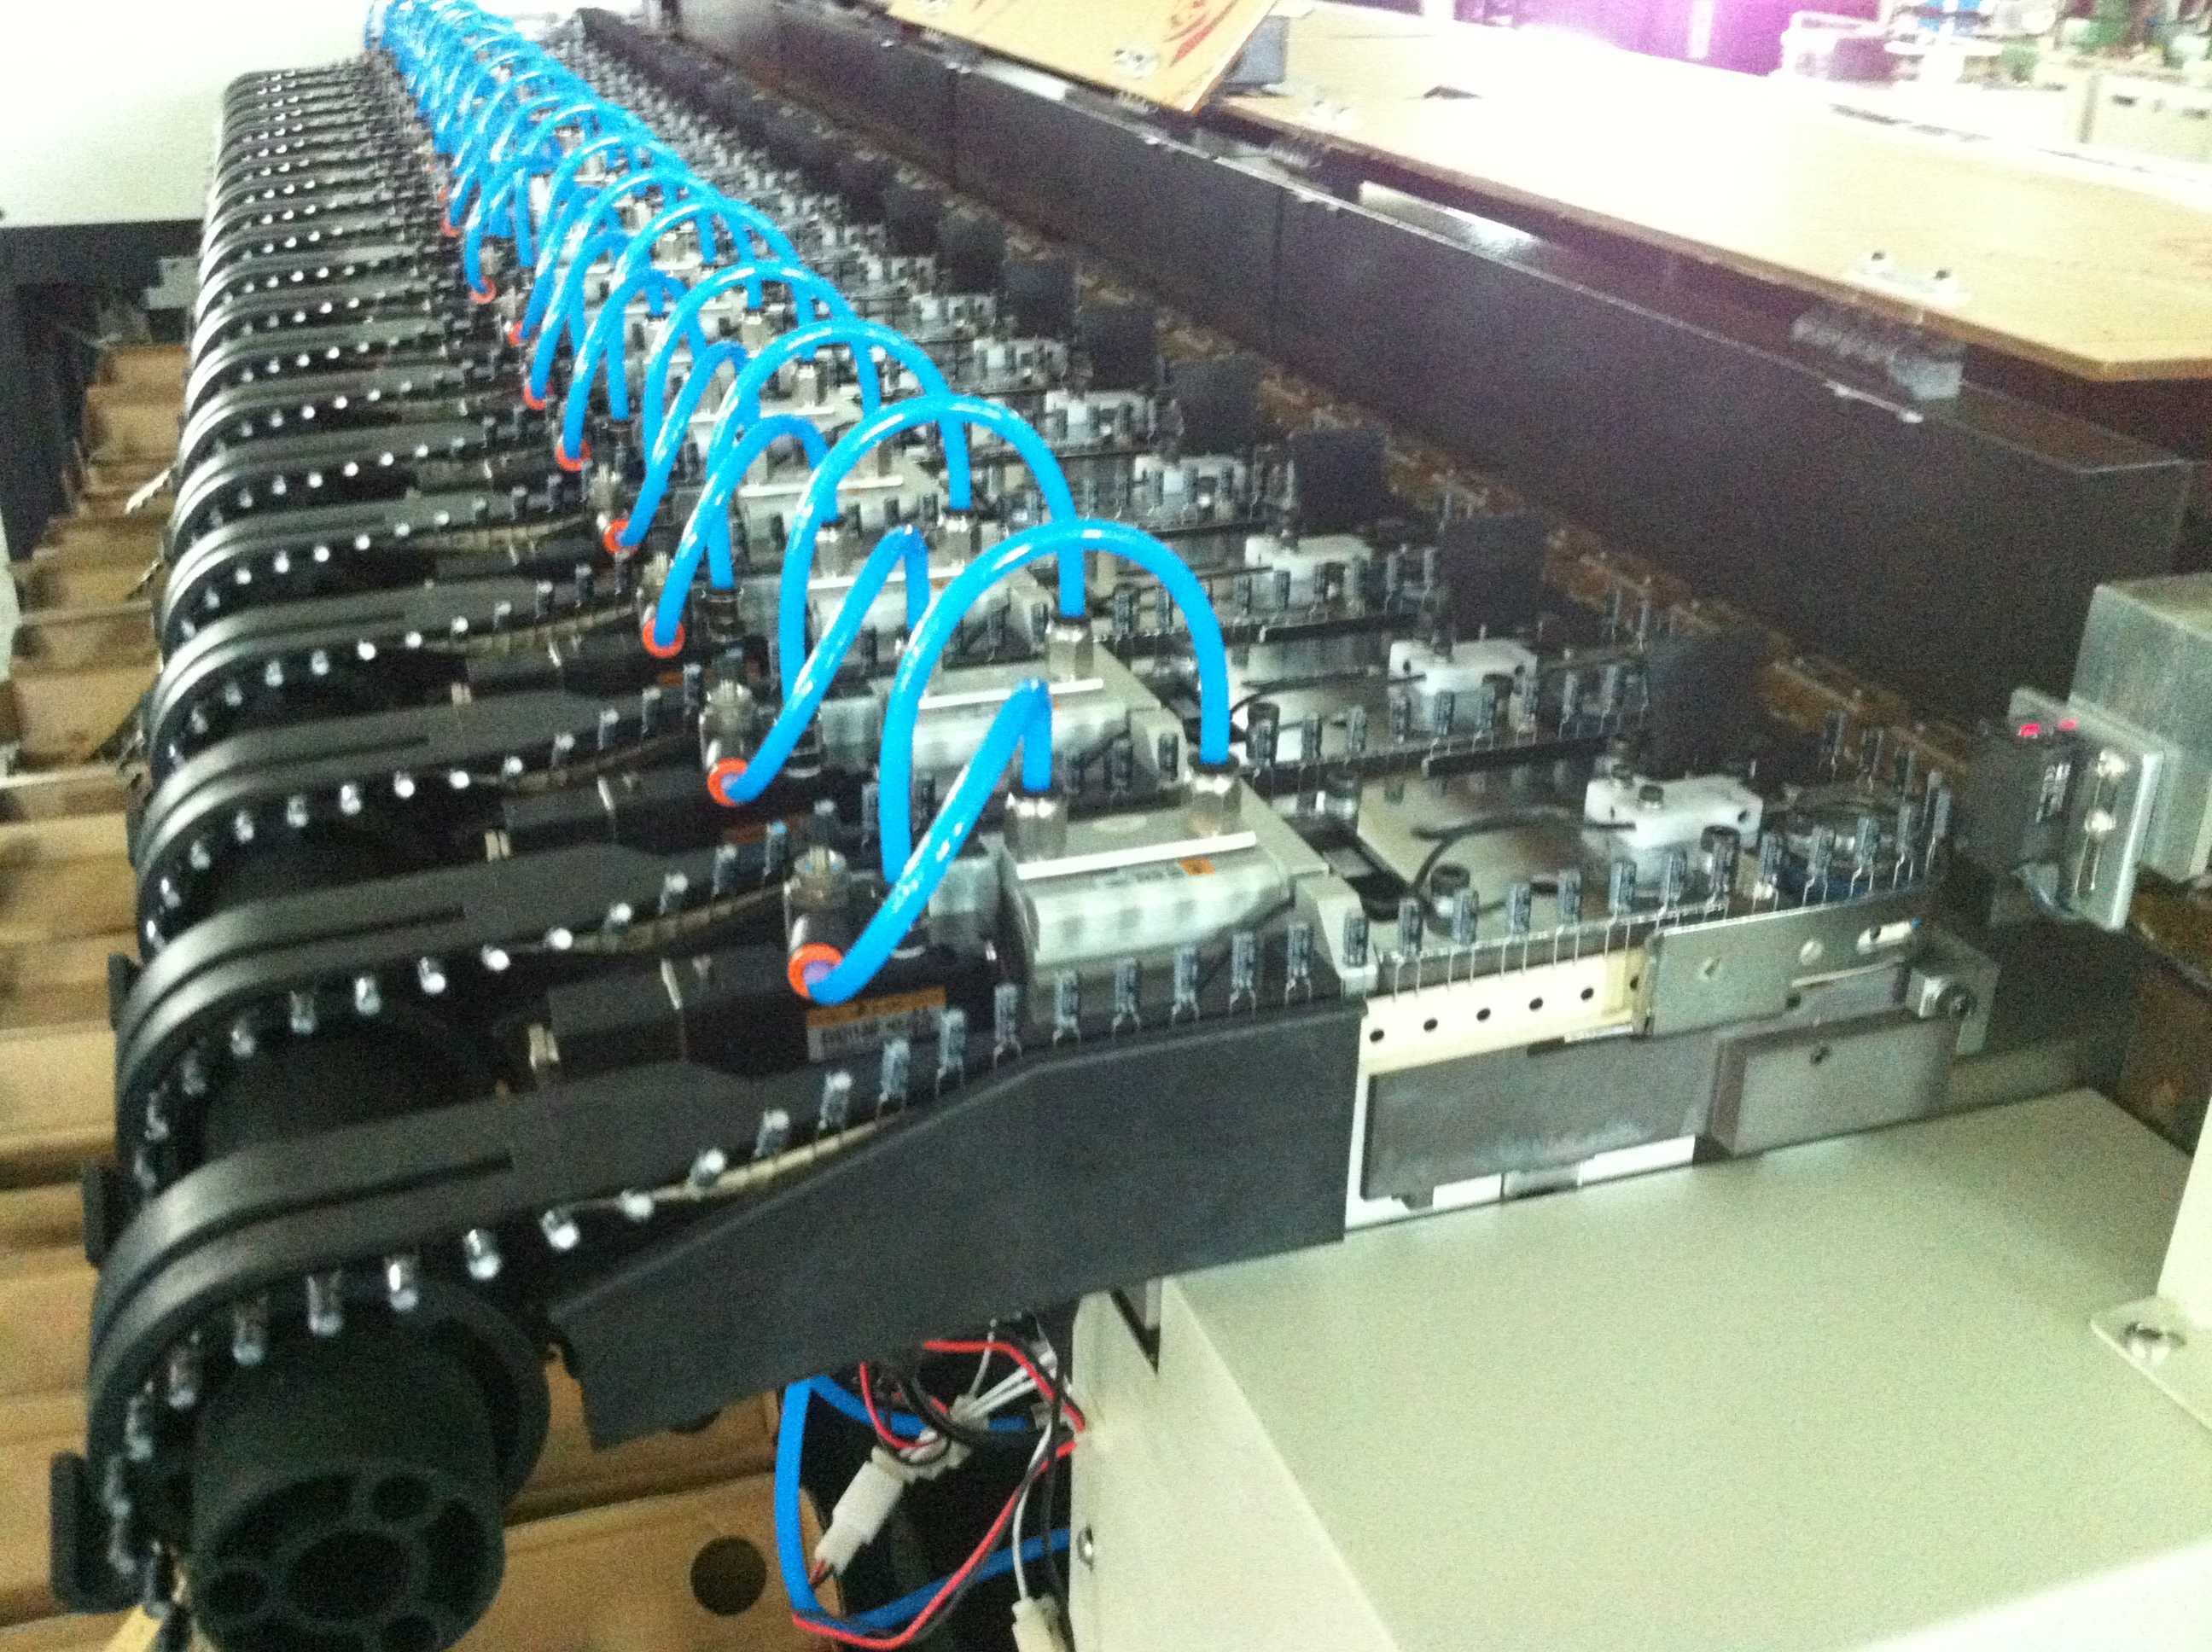 DIP, PCB Assembly，Chip Mounter, Pick and Place, IC Mounter, High Speed Mounter， Wave soldering，LED lighting, LED Lamp, LED Display, LED tube，UPS, Power Converter, Power Adepter, Mobile Charger, PCB board handling system, Loader, Unloader, Conveyor,Shuttle， Chip Mounter, Pick and Place, IC Mounter, High Speed Mounter Induction Cooker, AC, Electric Cooker, Fan, TV, Settle Box